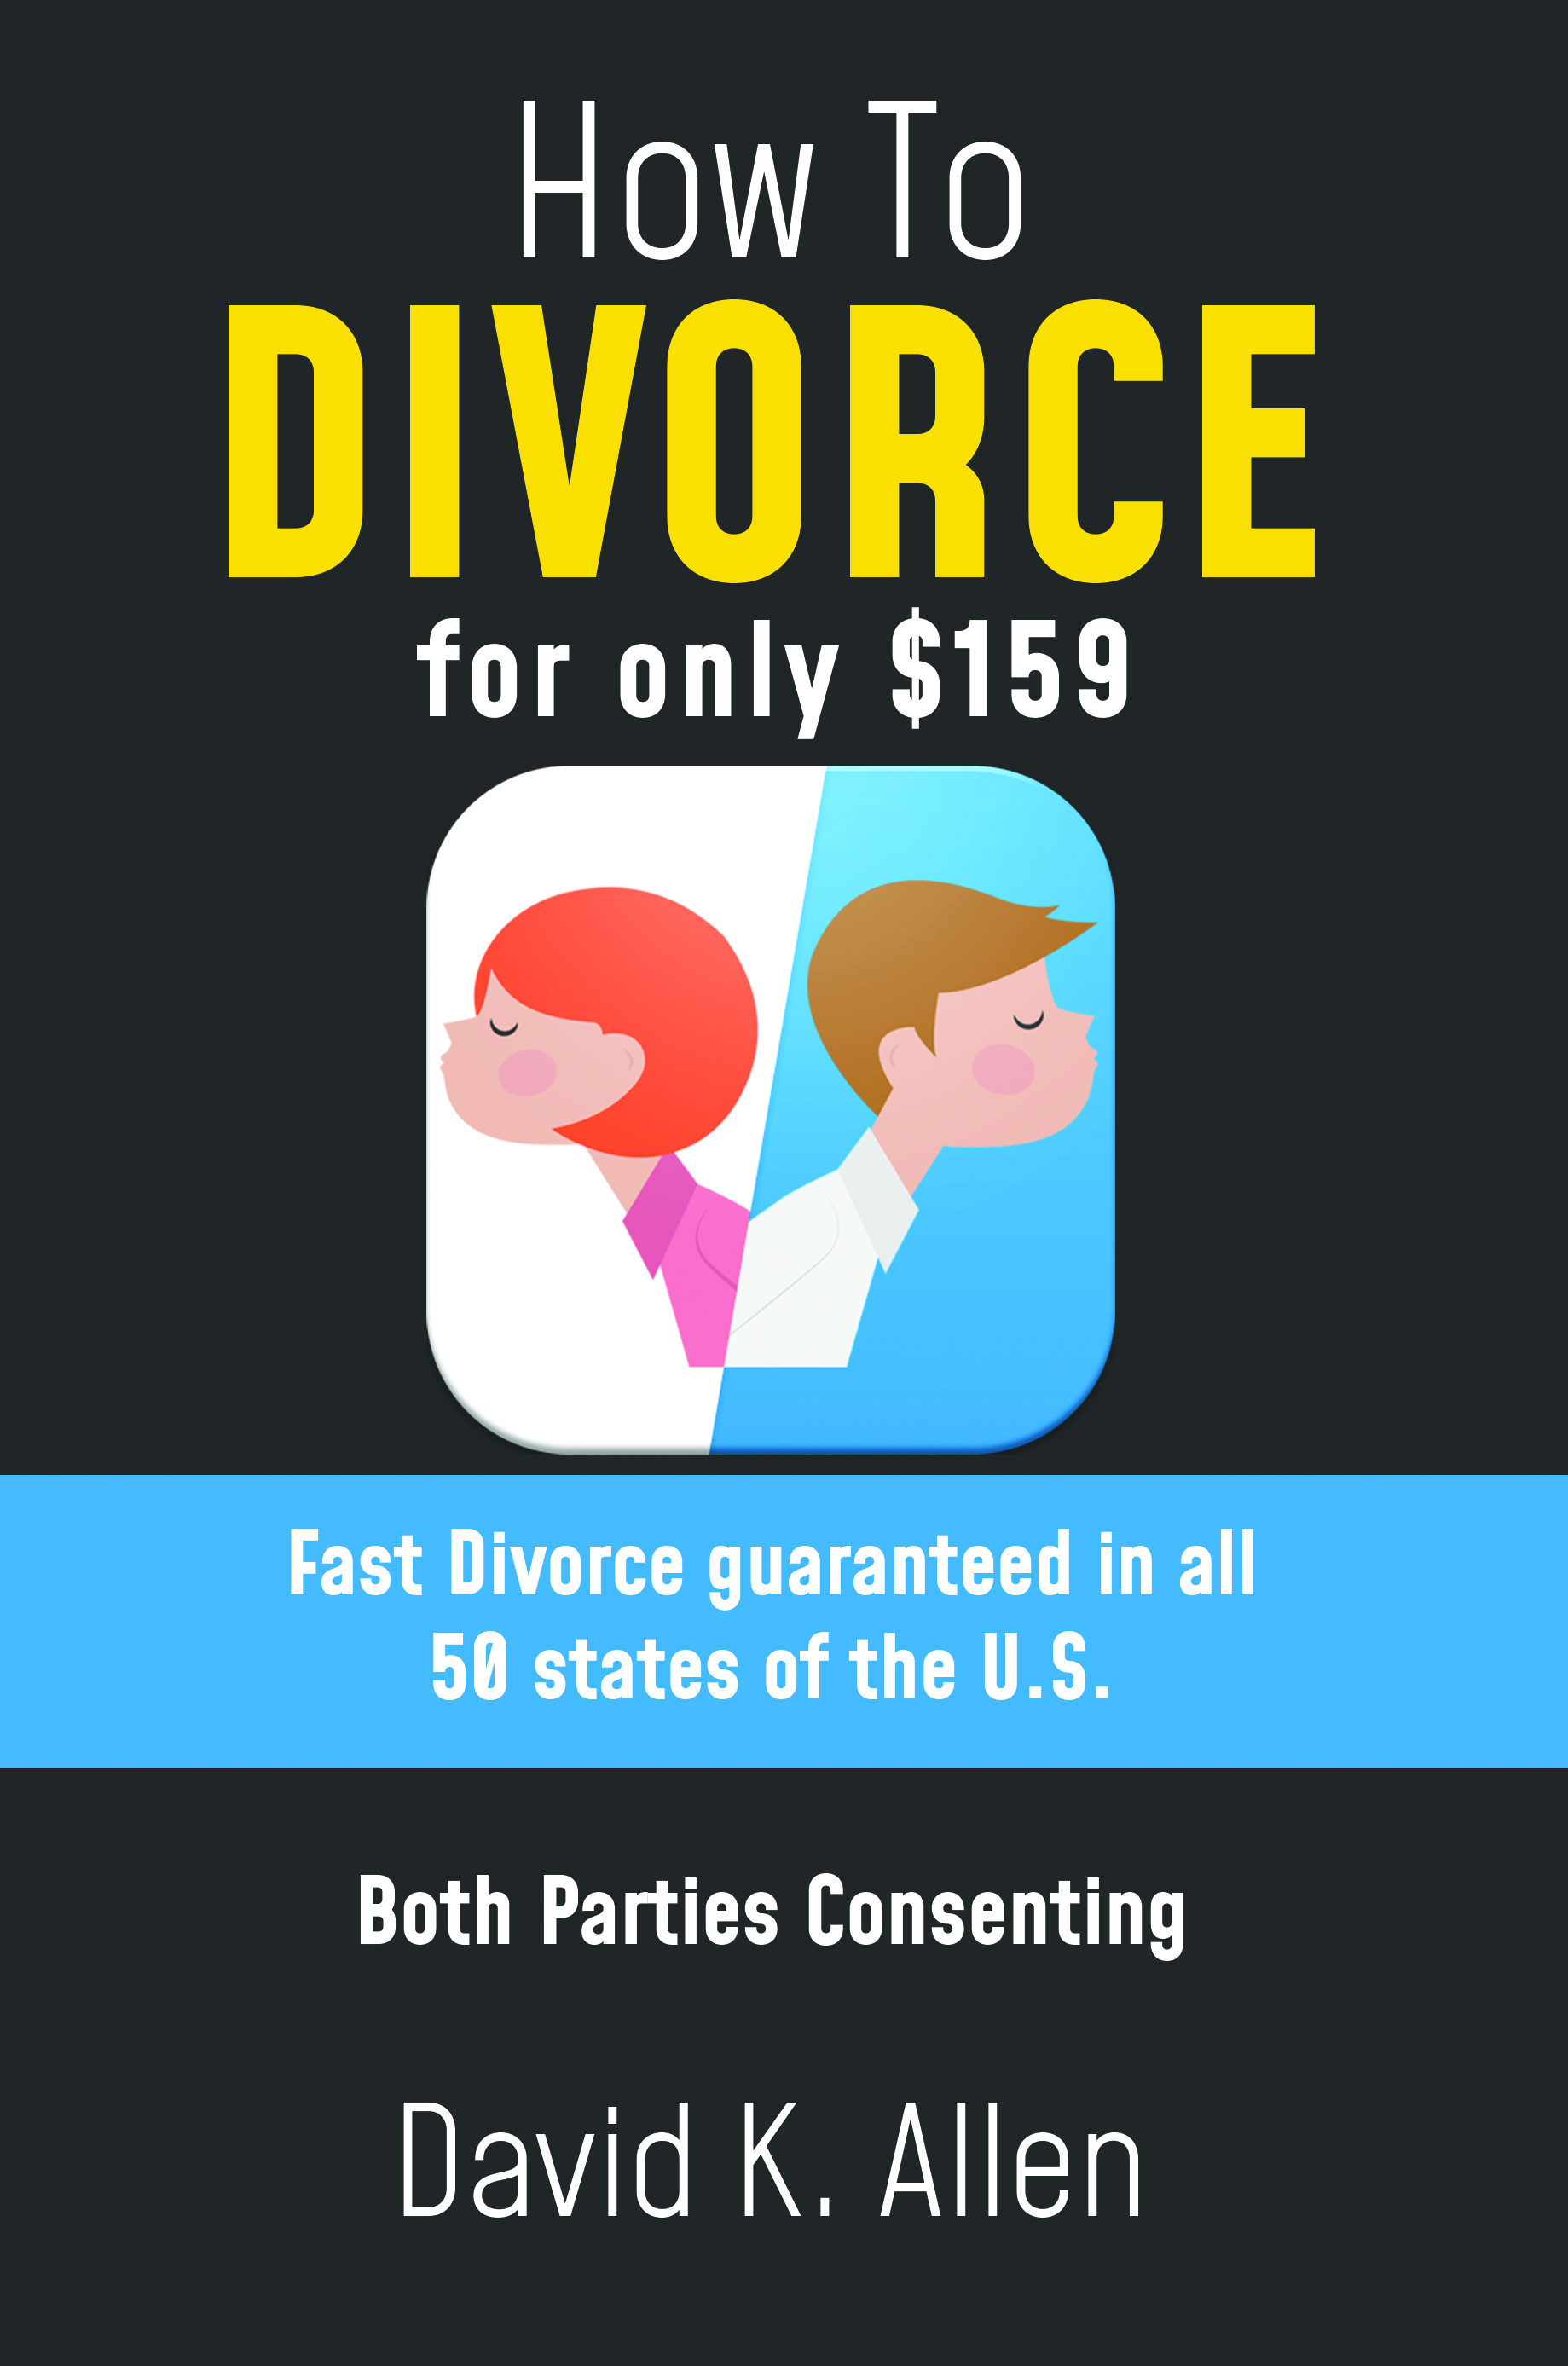 How to Divorce for $299 with no hidden charges